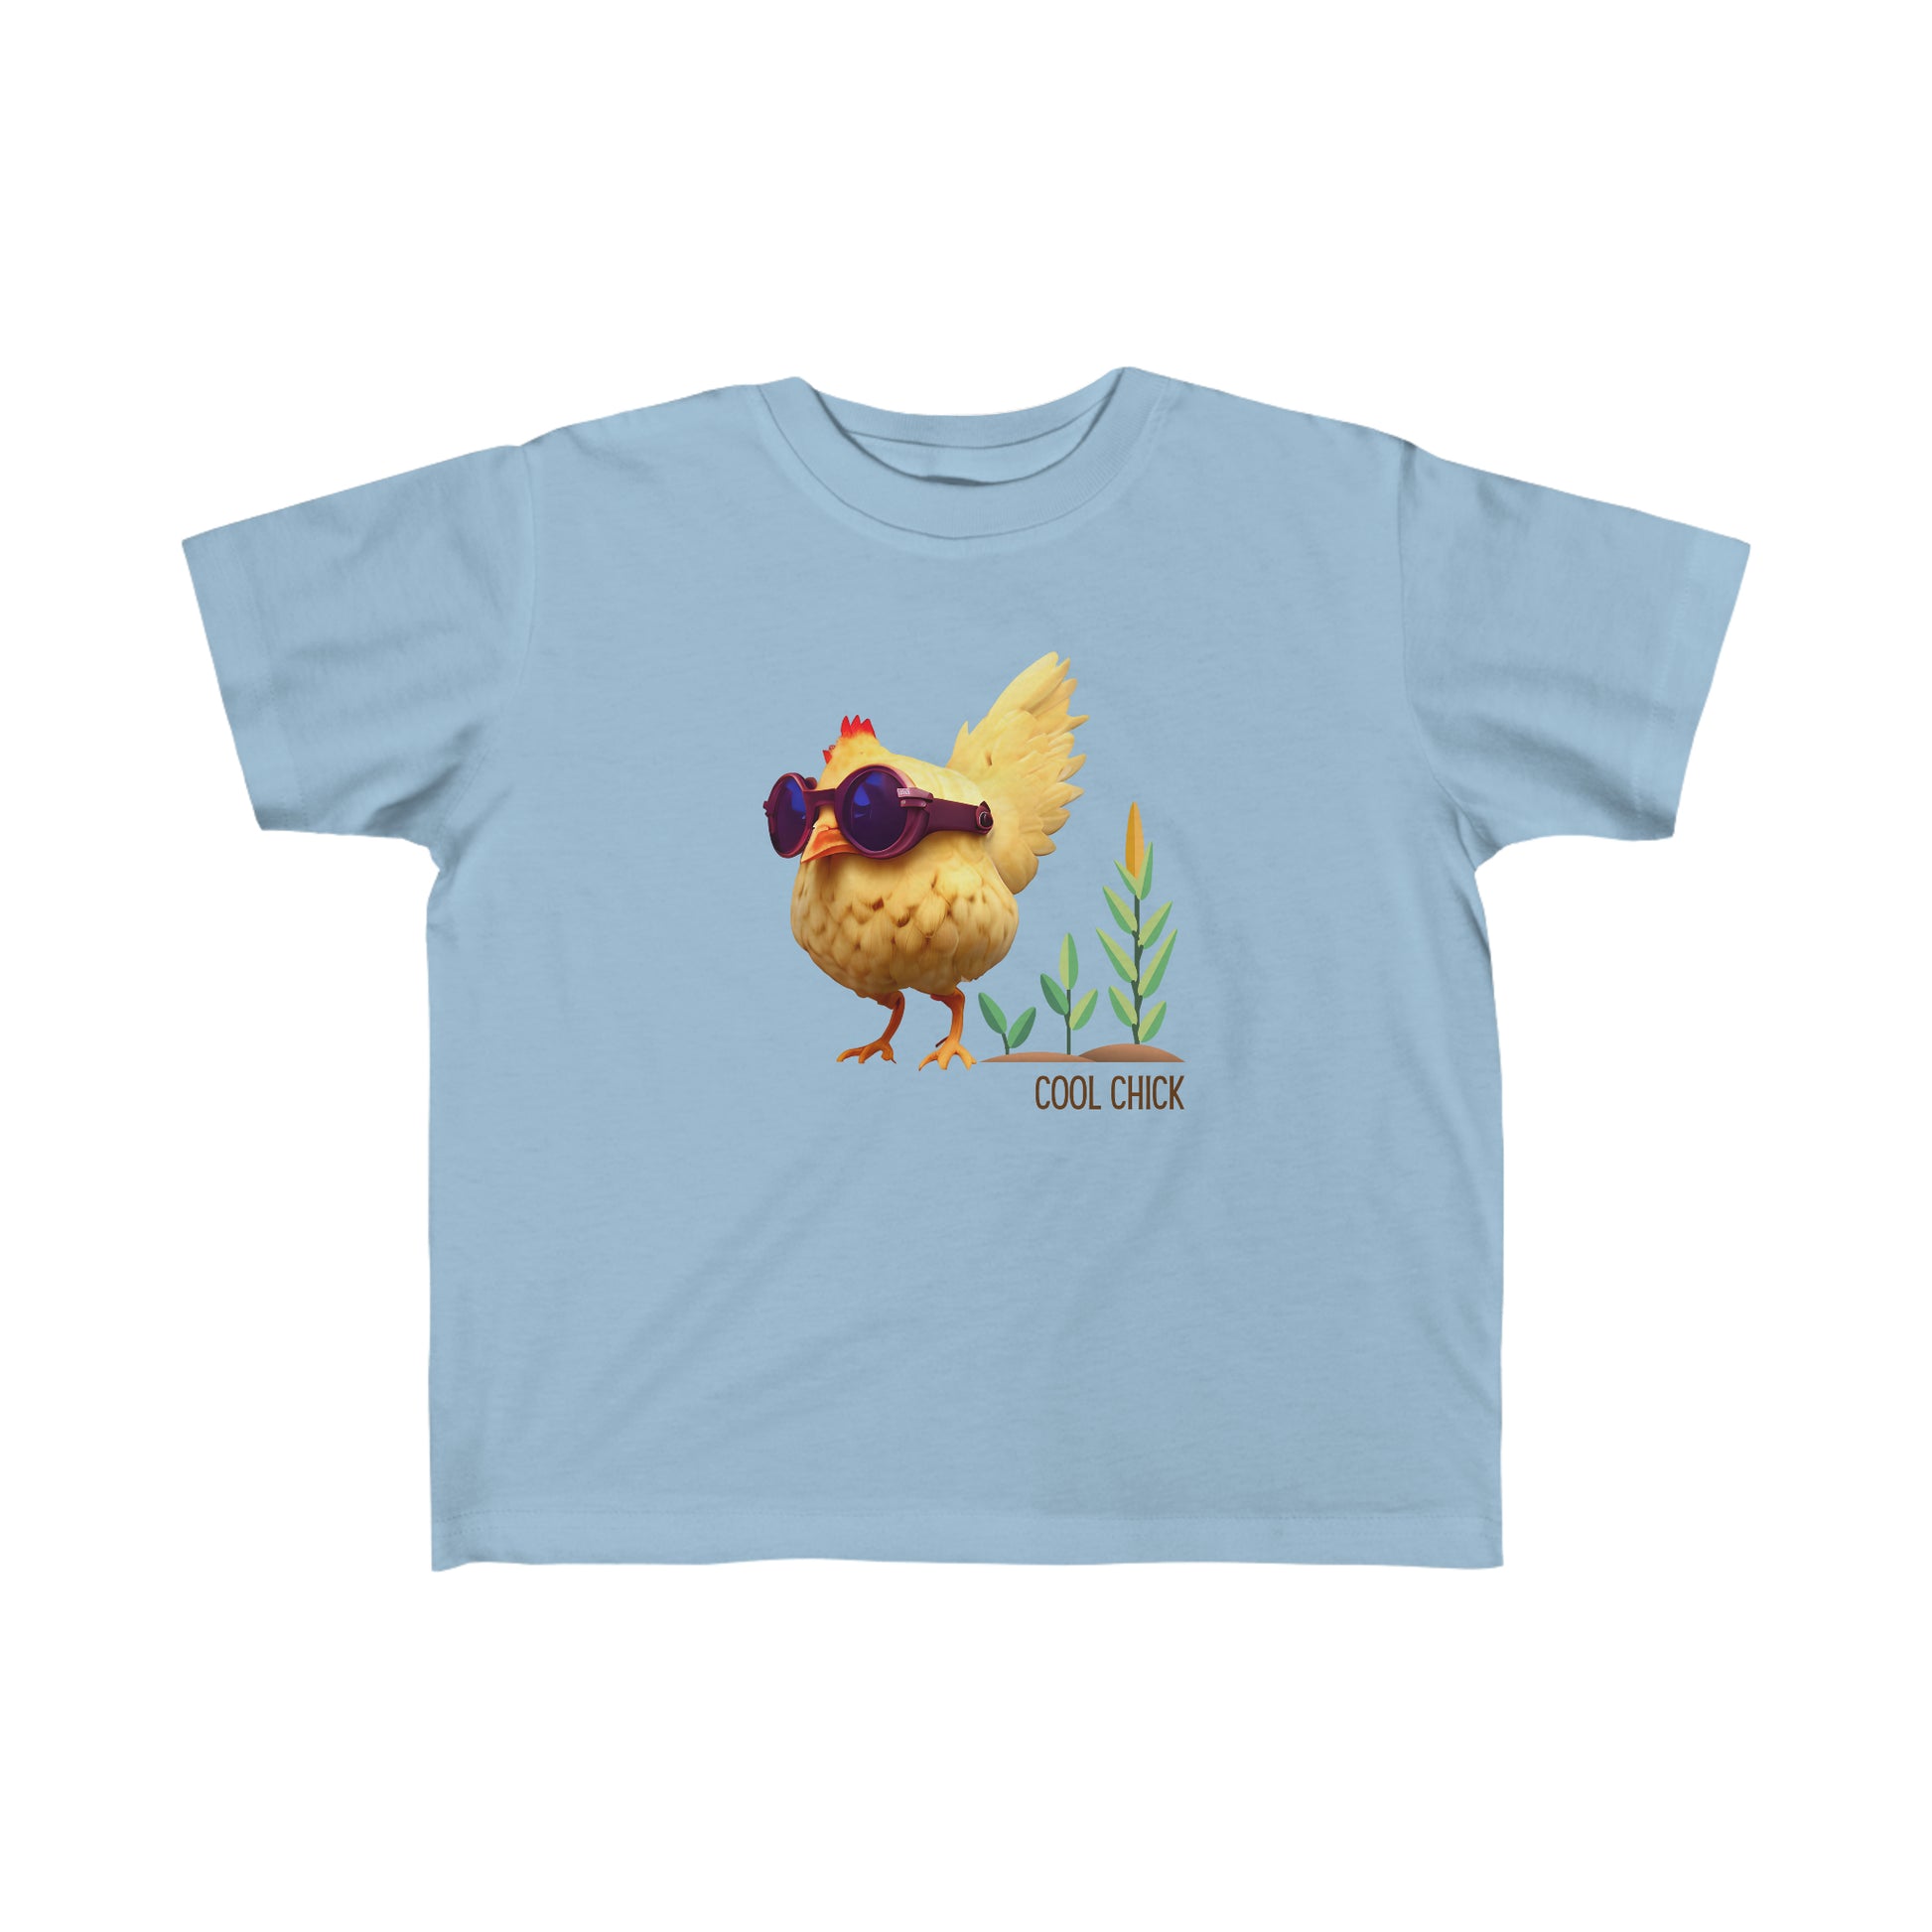 Cool Chick T-shirt in Light Blue